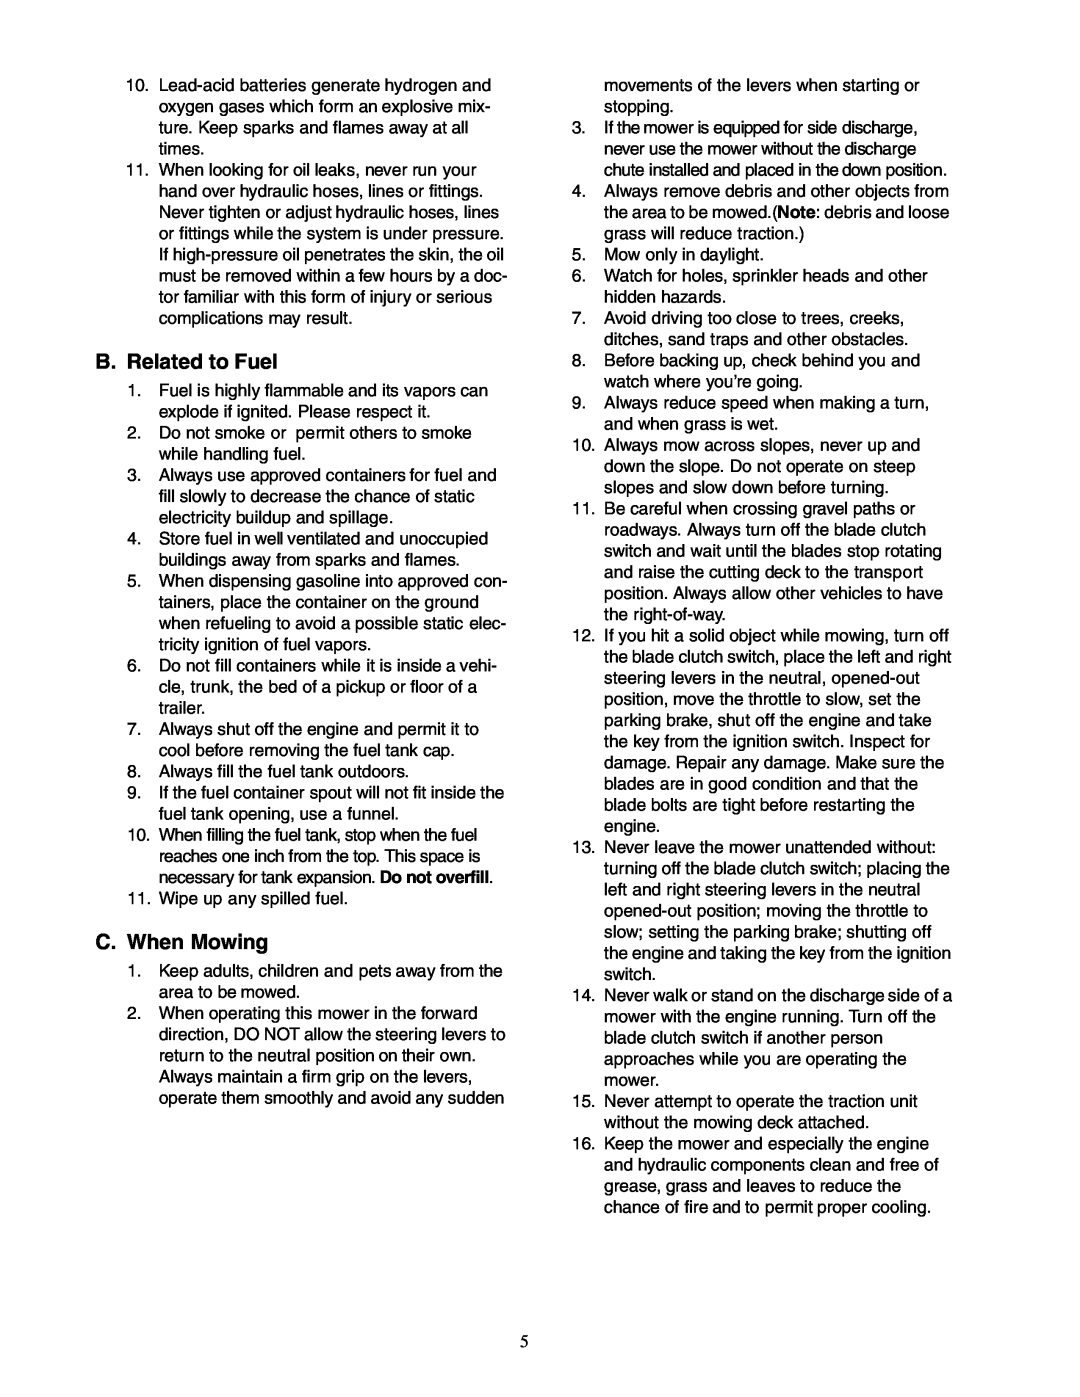 Cub Cadet Z - Wing 48 service manual B.Related to Fuel, C.When Mowing 